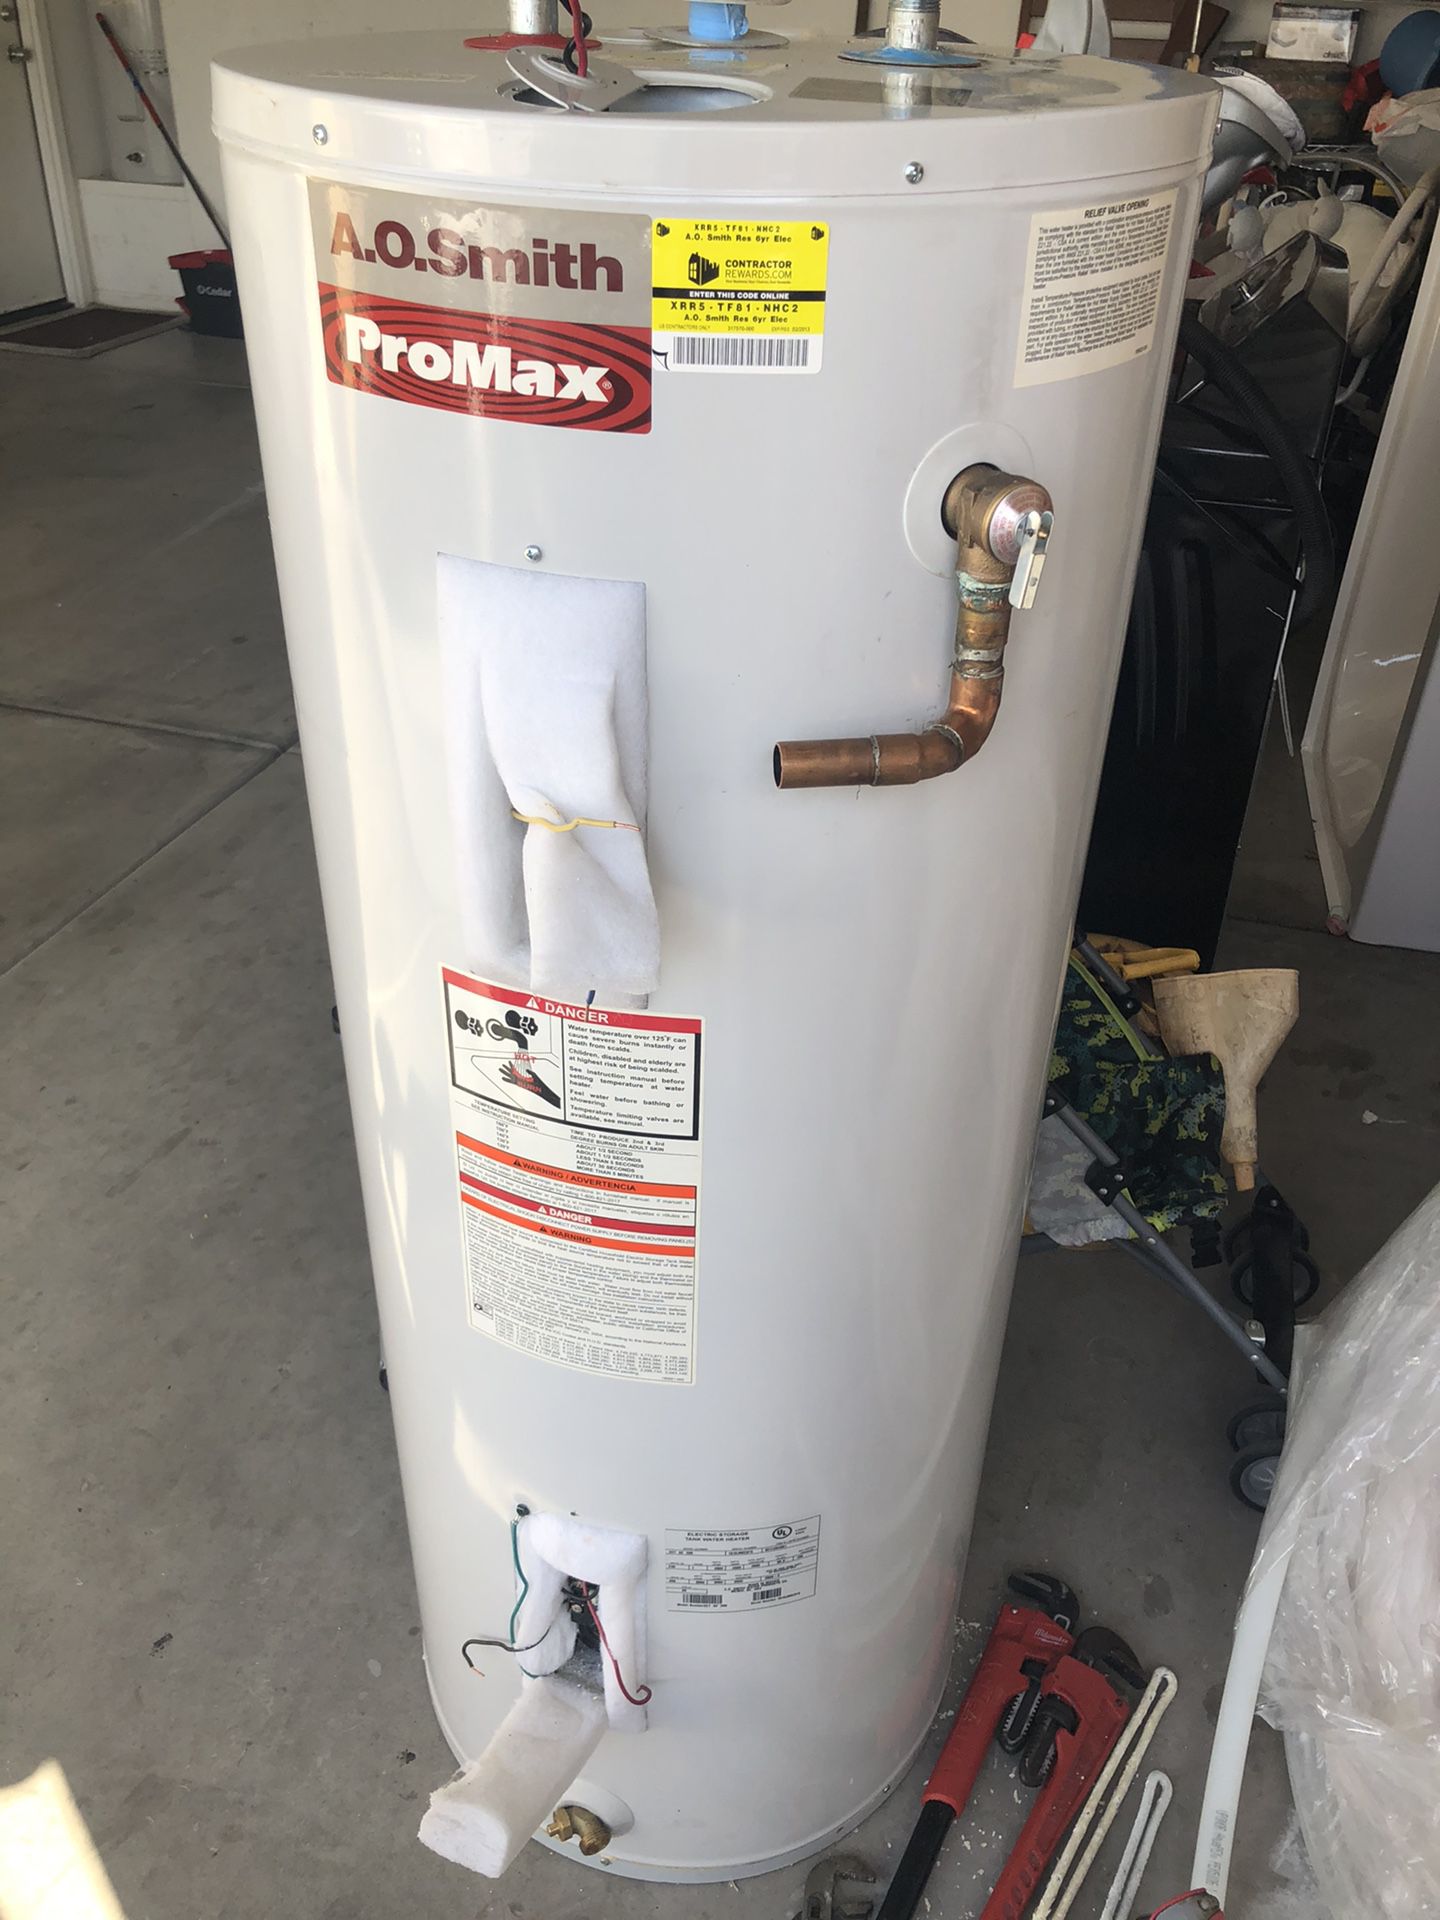 Water heater for sale